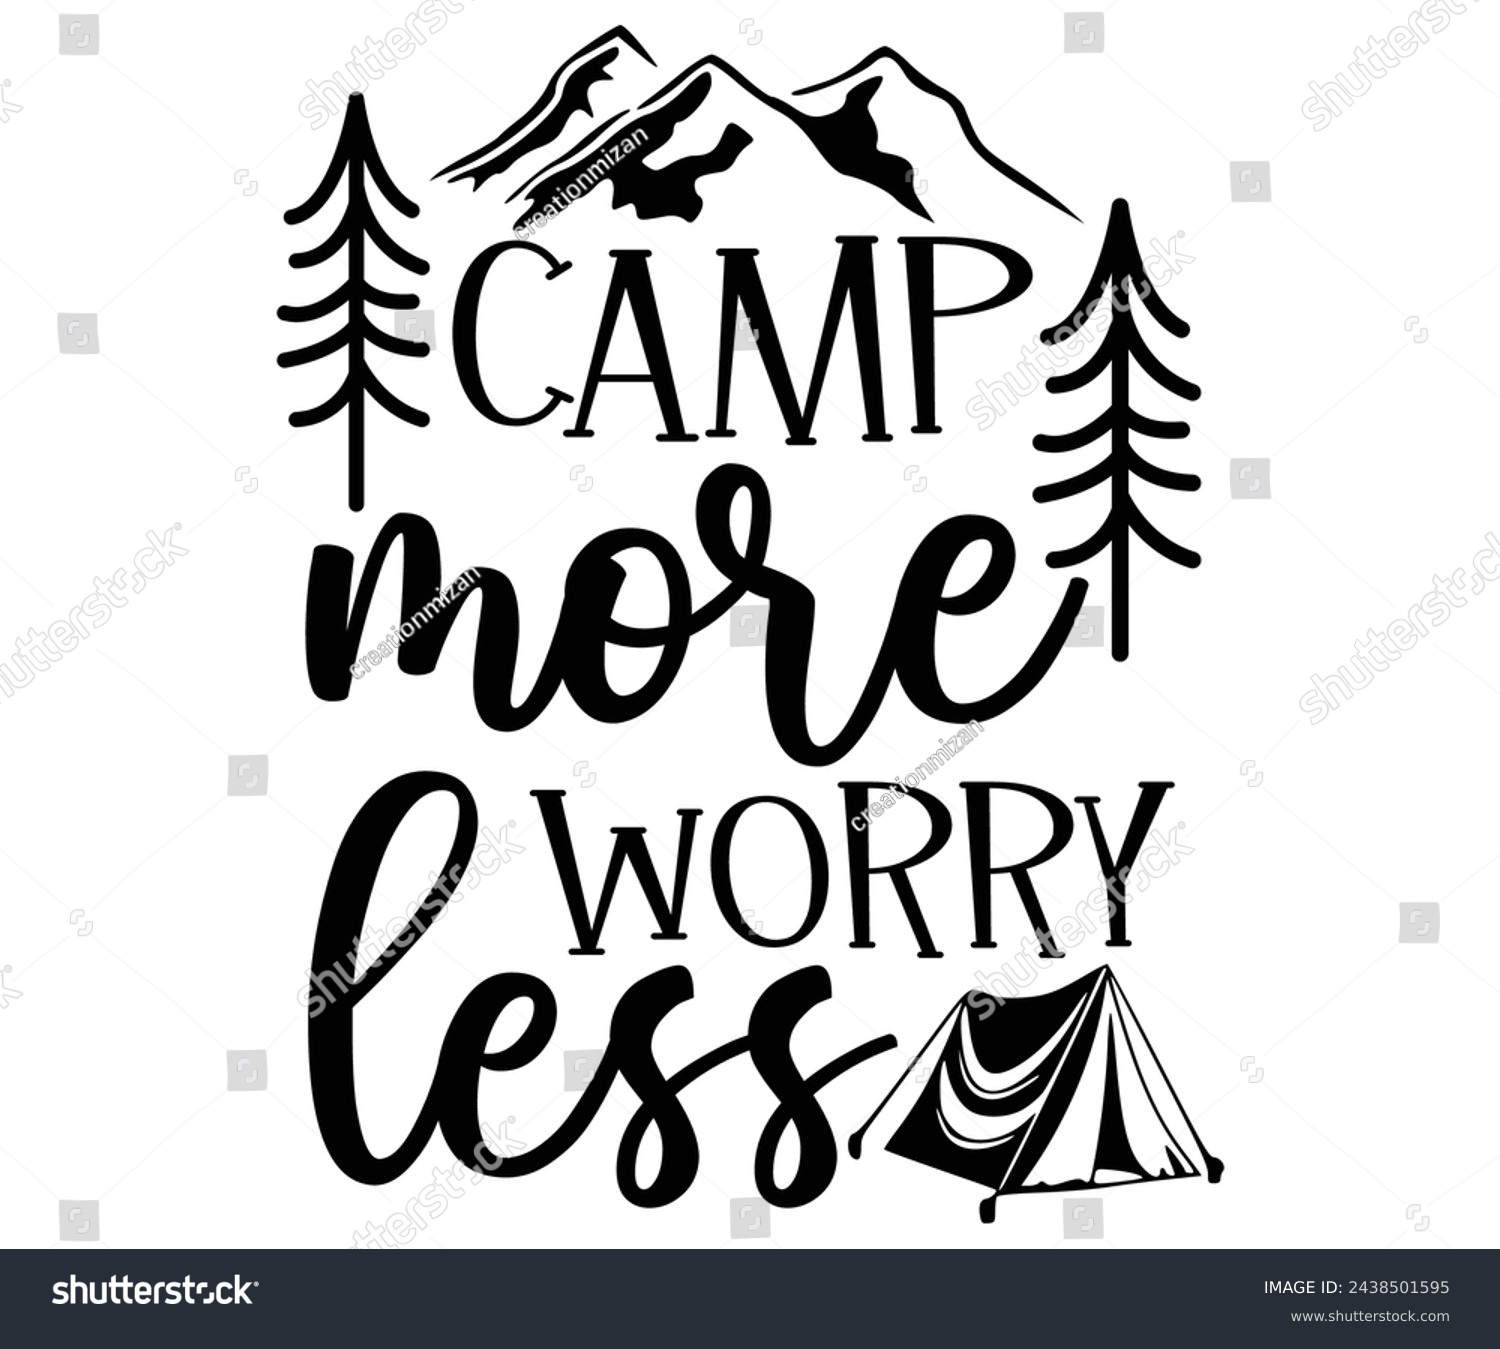 SVG of Camp more worry less Svg,Camping Svg,Hiking,Funny Camping,Adventure,Summer Camp,Happy Camper,Camp Life,Camp Saying,Camping Shirt svg